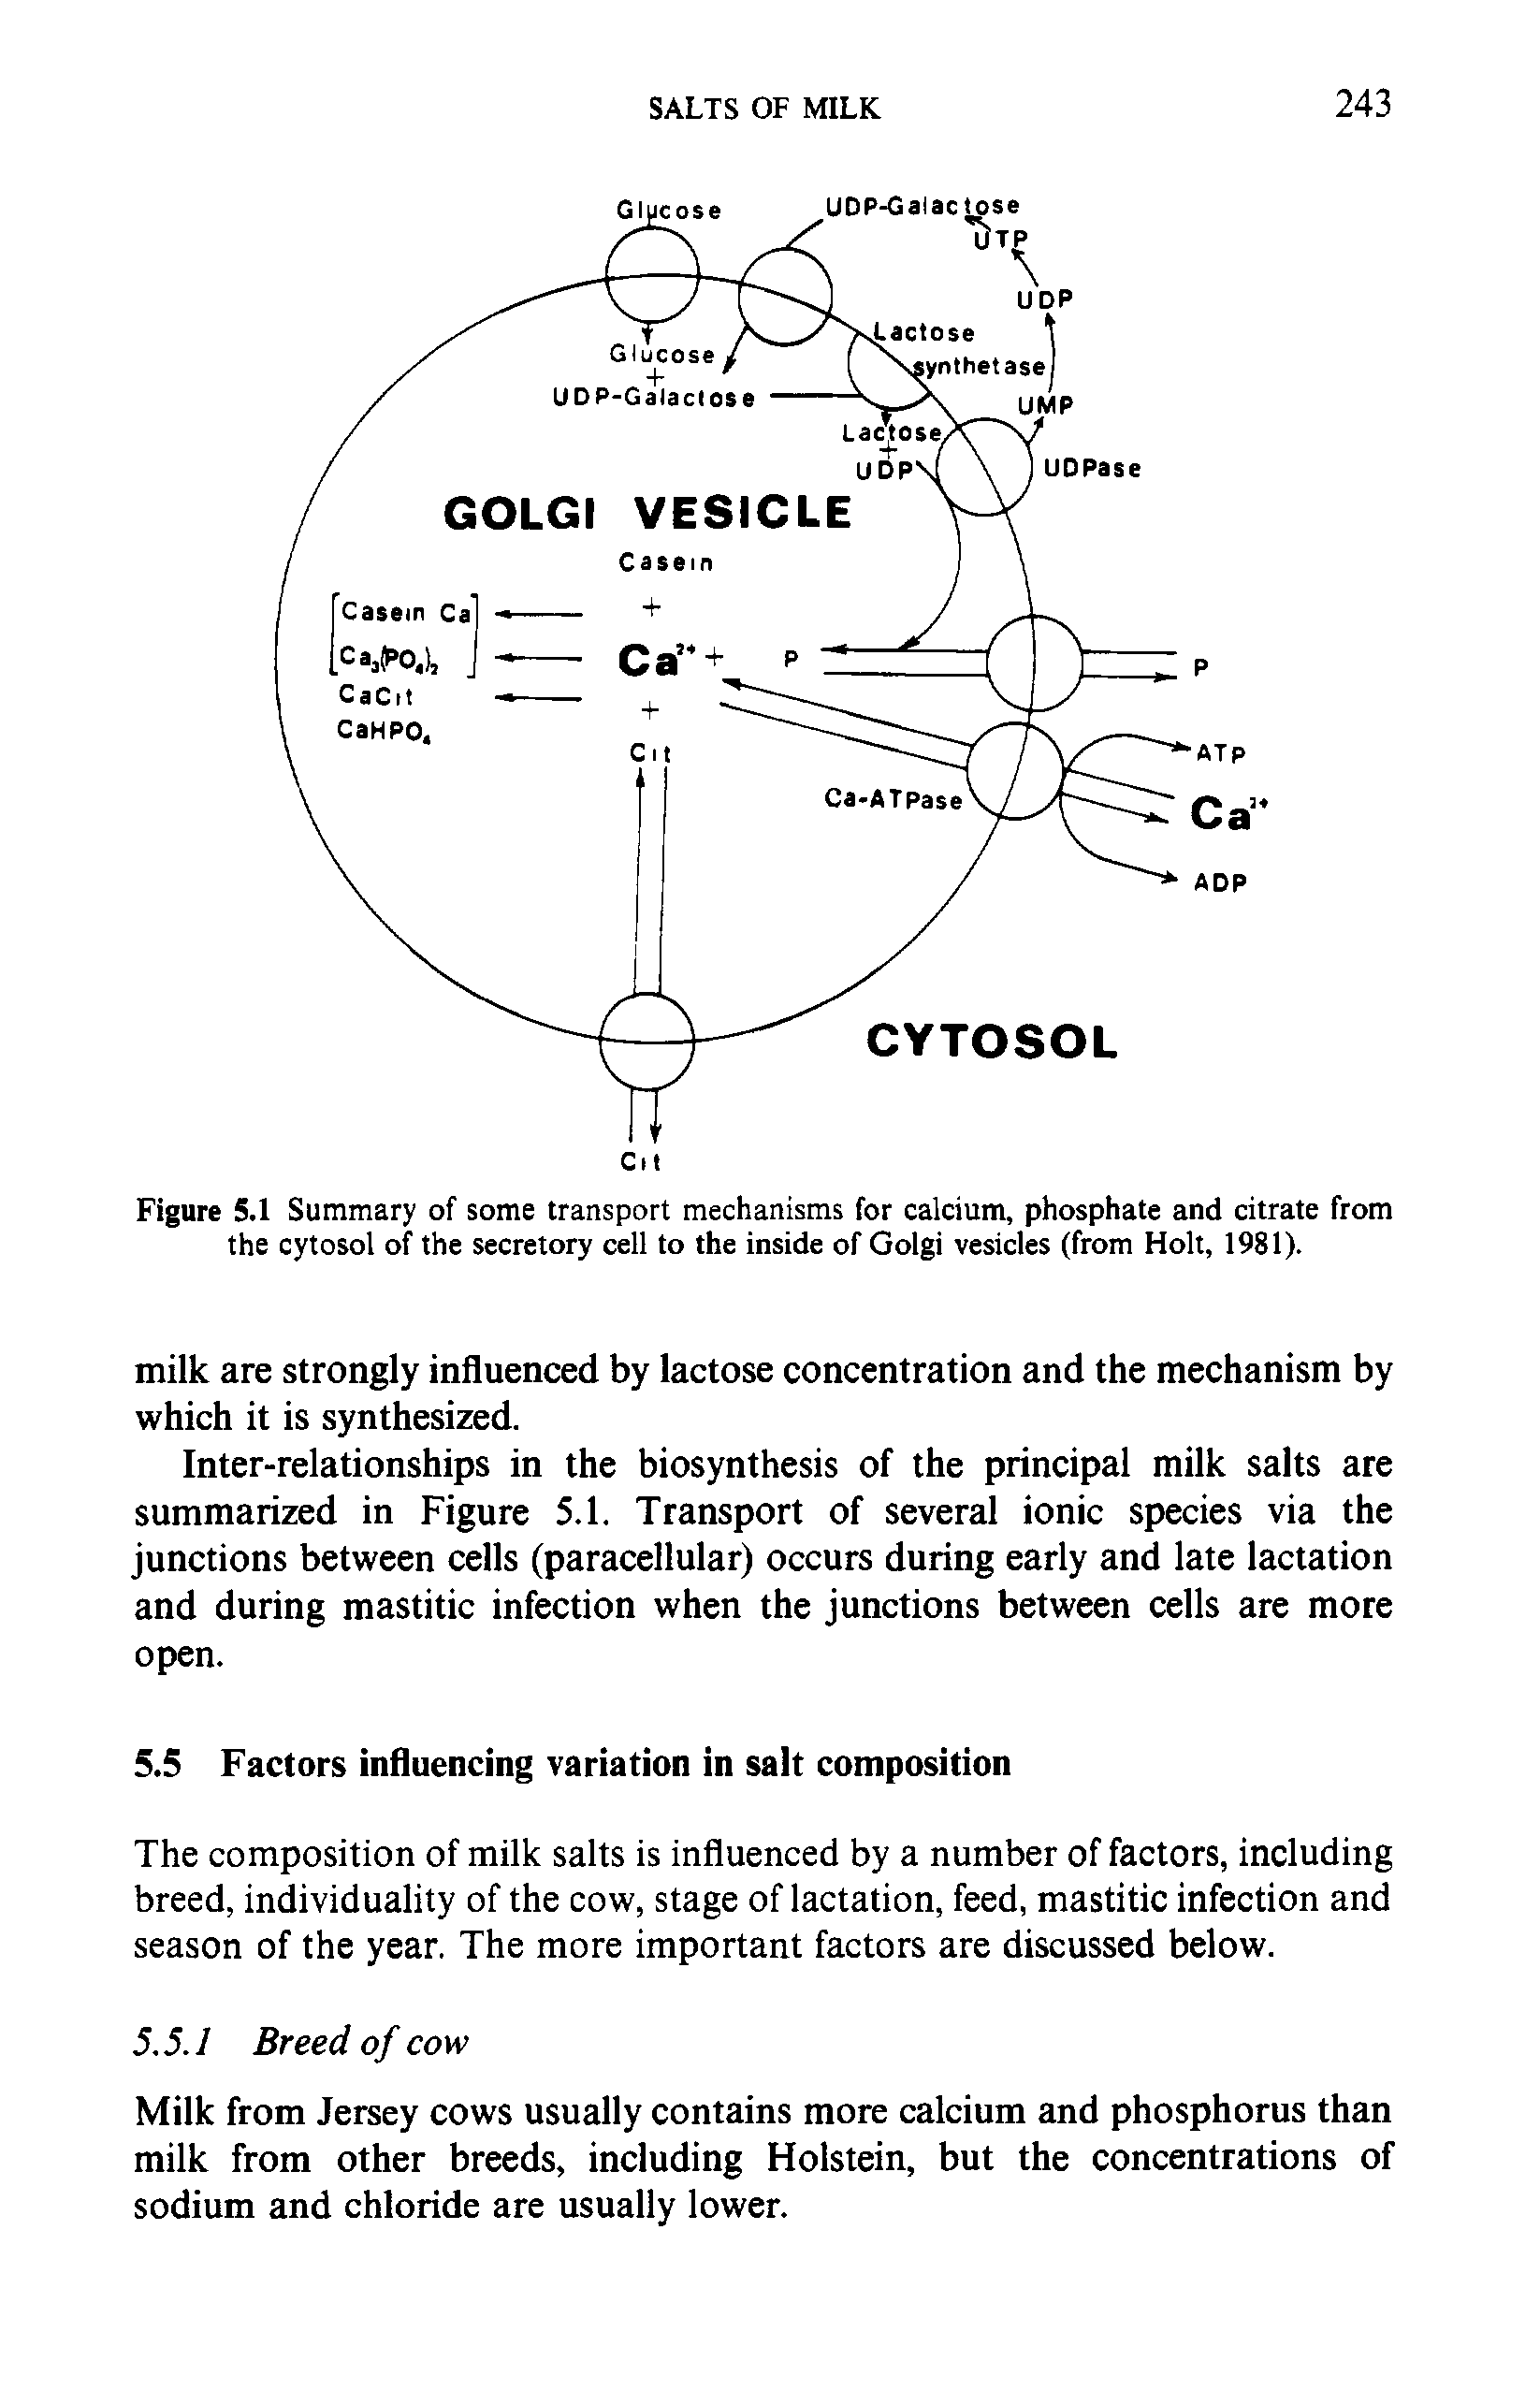 Figure 5.1 Summary of some transport mechanisms for calcium, phosphate and citrate from the cytosol of the secretory cell to the inside of Golgi vesicles (from Holt, 1981).